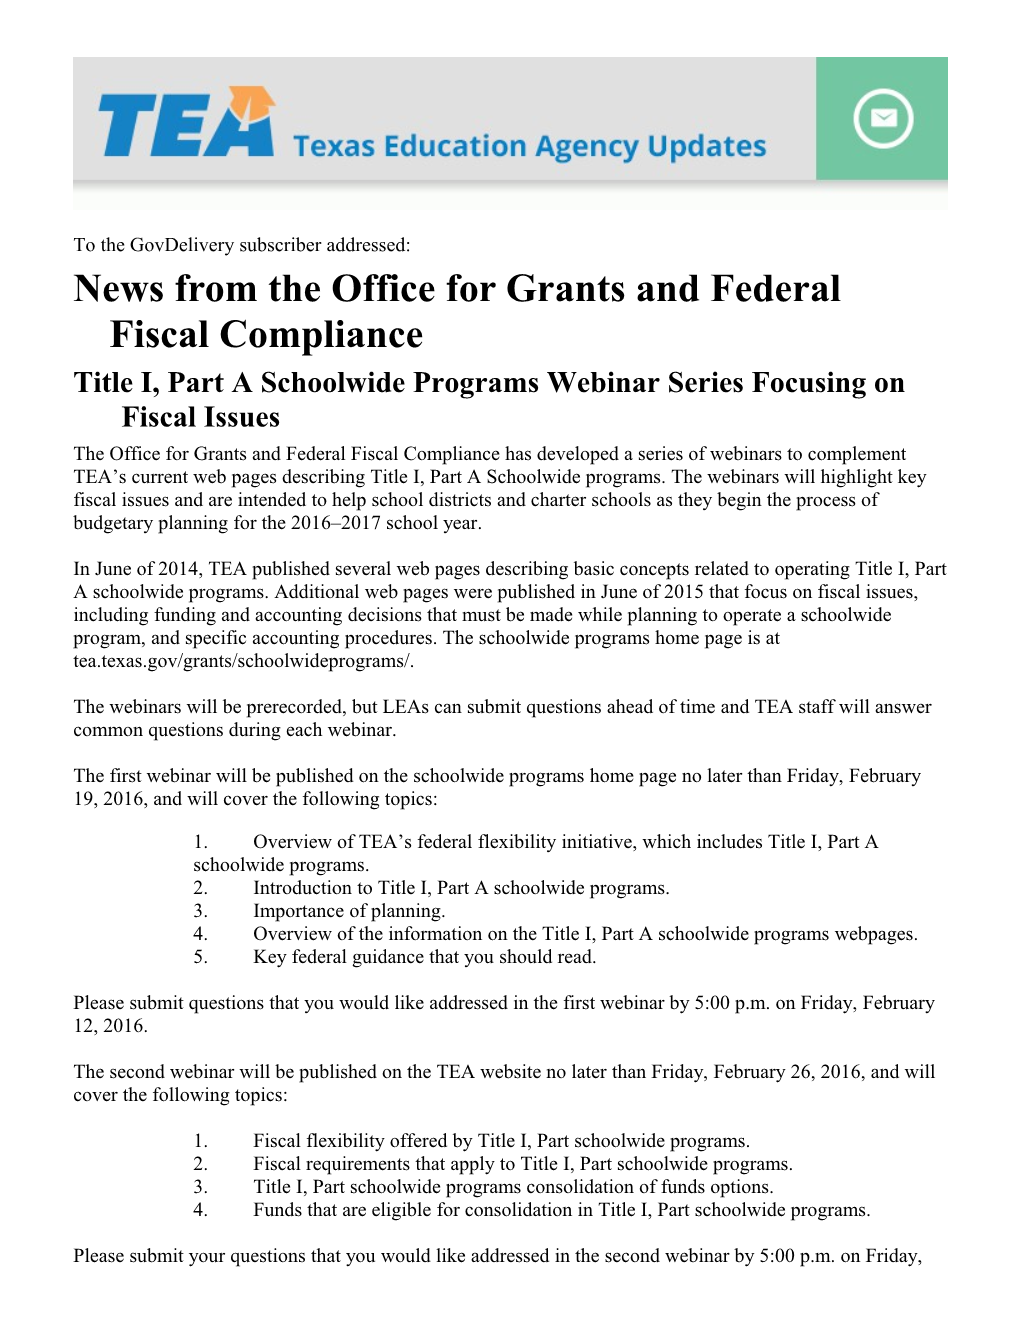 News from the Office for Grants and Federal Fiscal Compliance